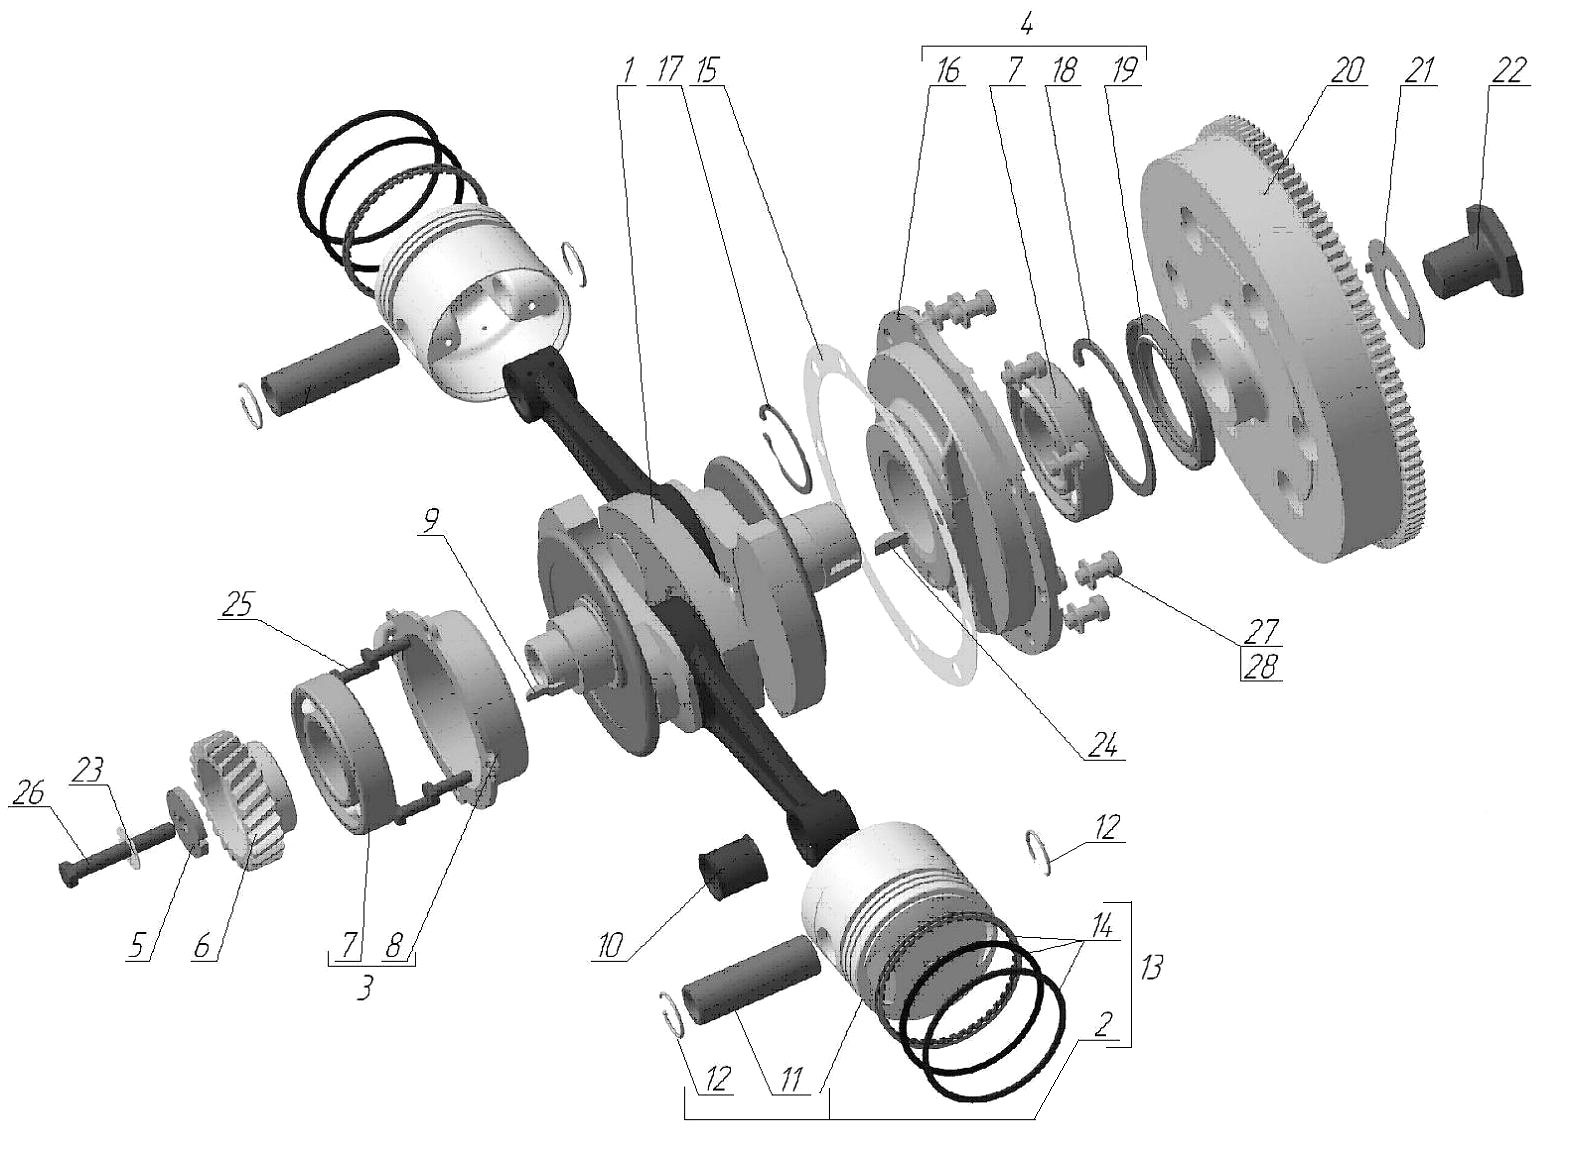 Crankshaft with conrods and pistons